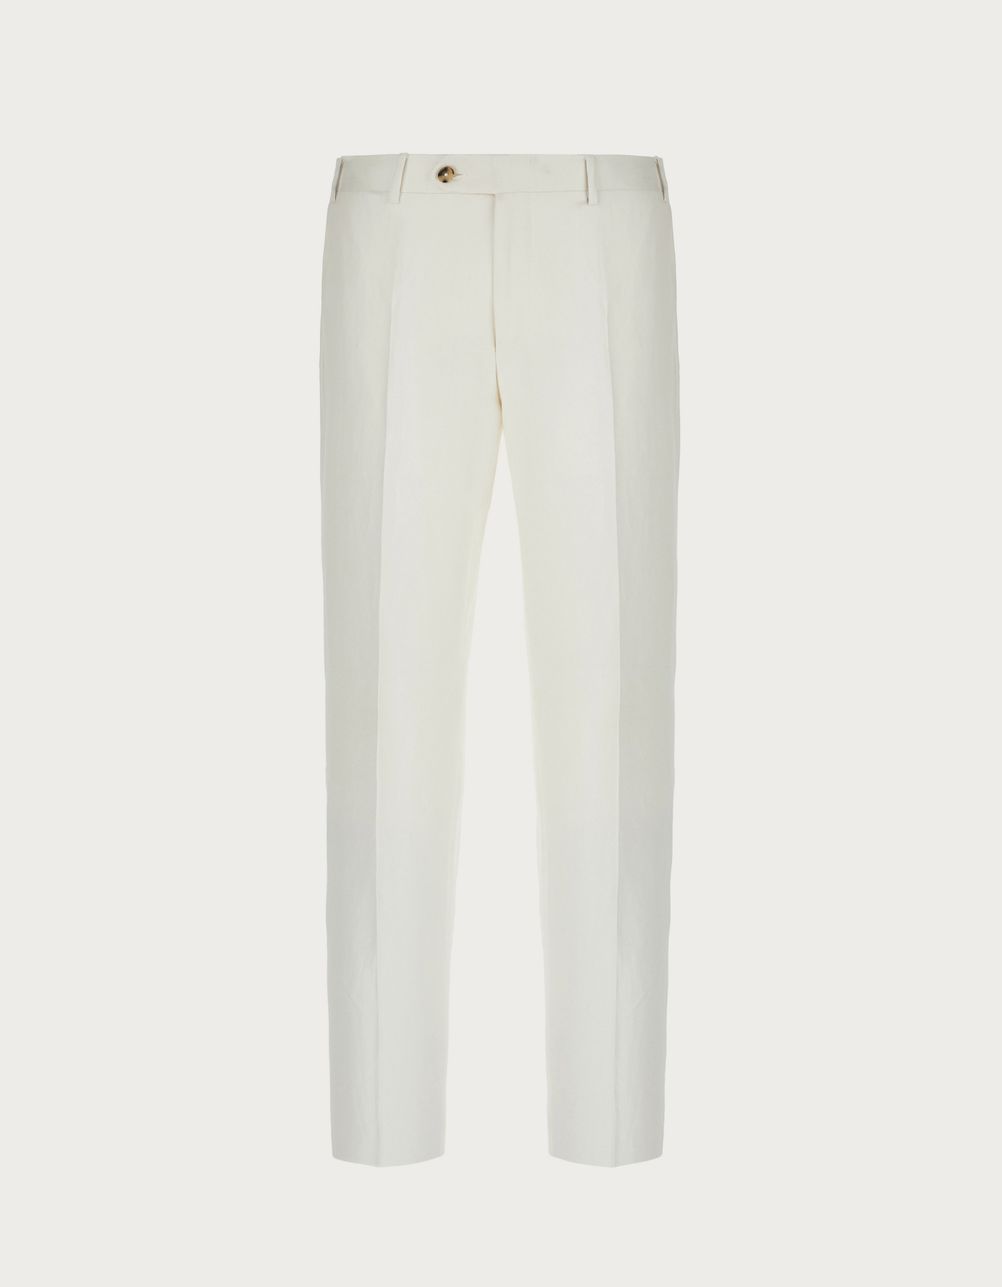 White trousers in silk and linen - Exclusive